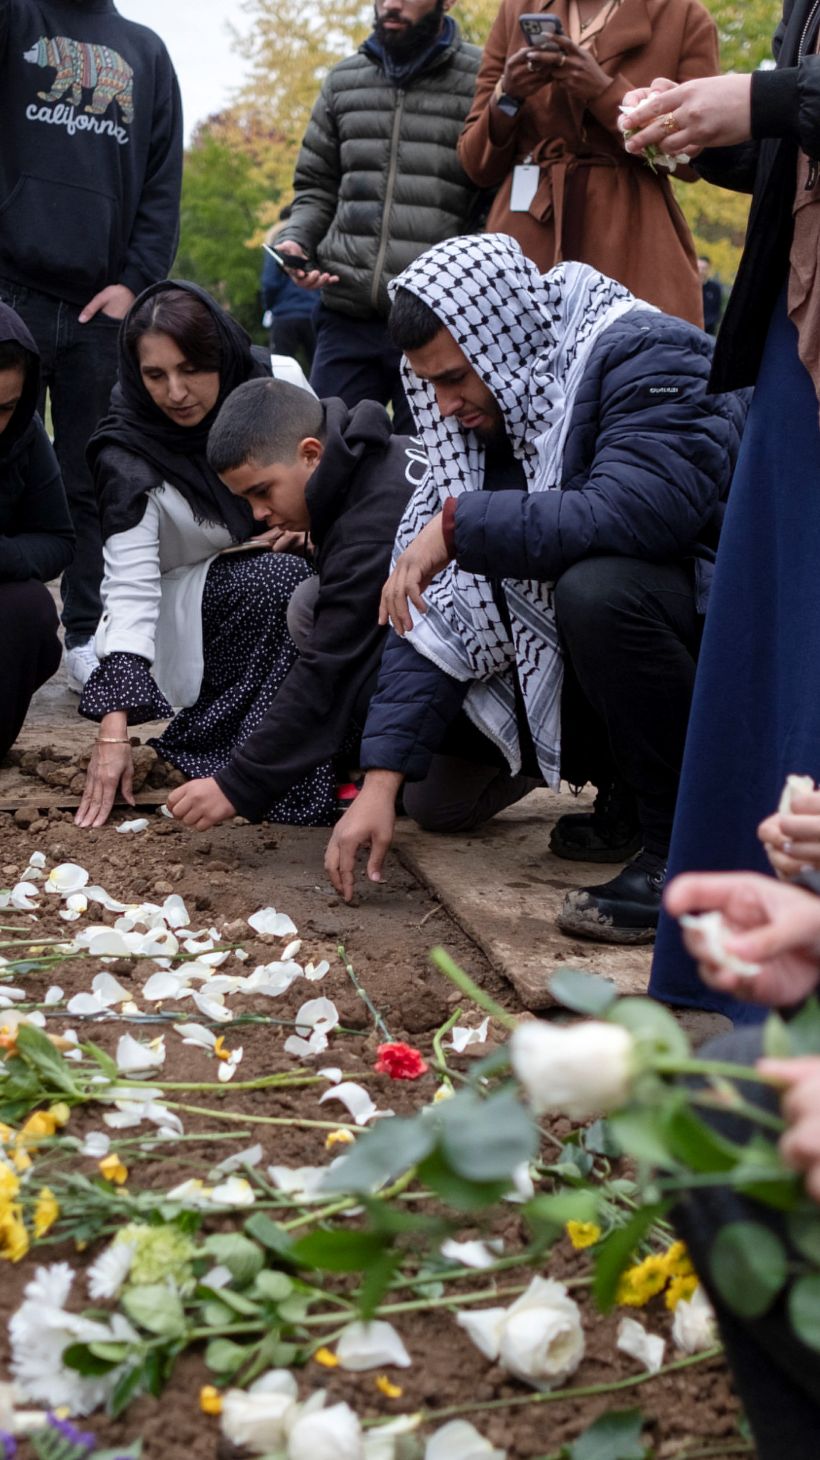 Mourners place flowers at the grave of Wadea Al-Fayoume, a six-year-old Palestinian American child, who was killed in a Chicago suburb